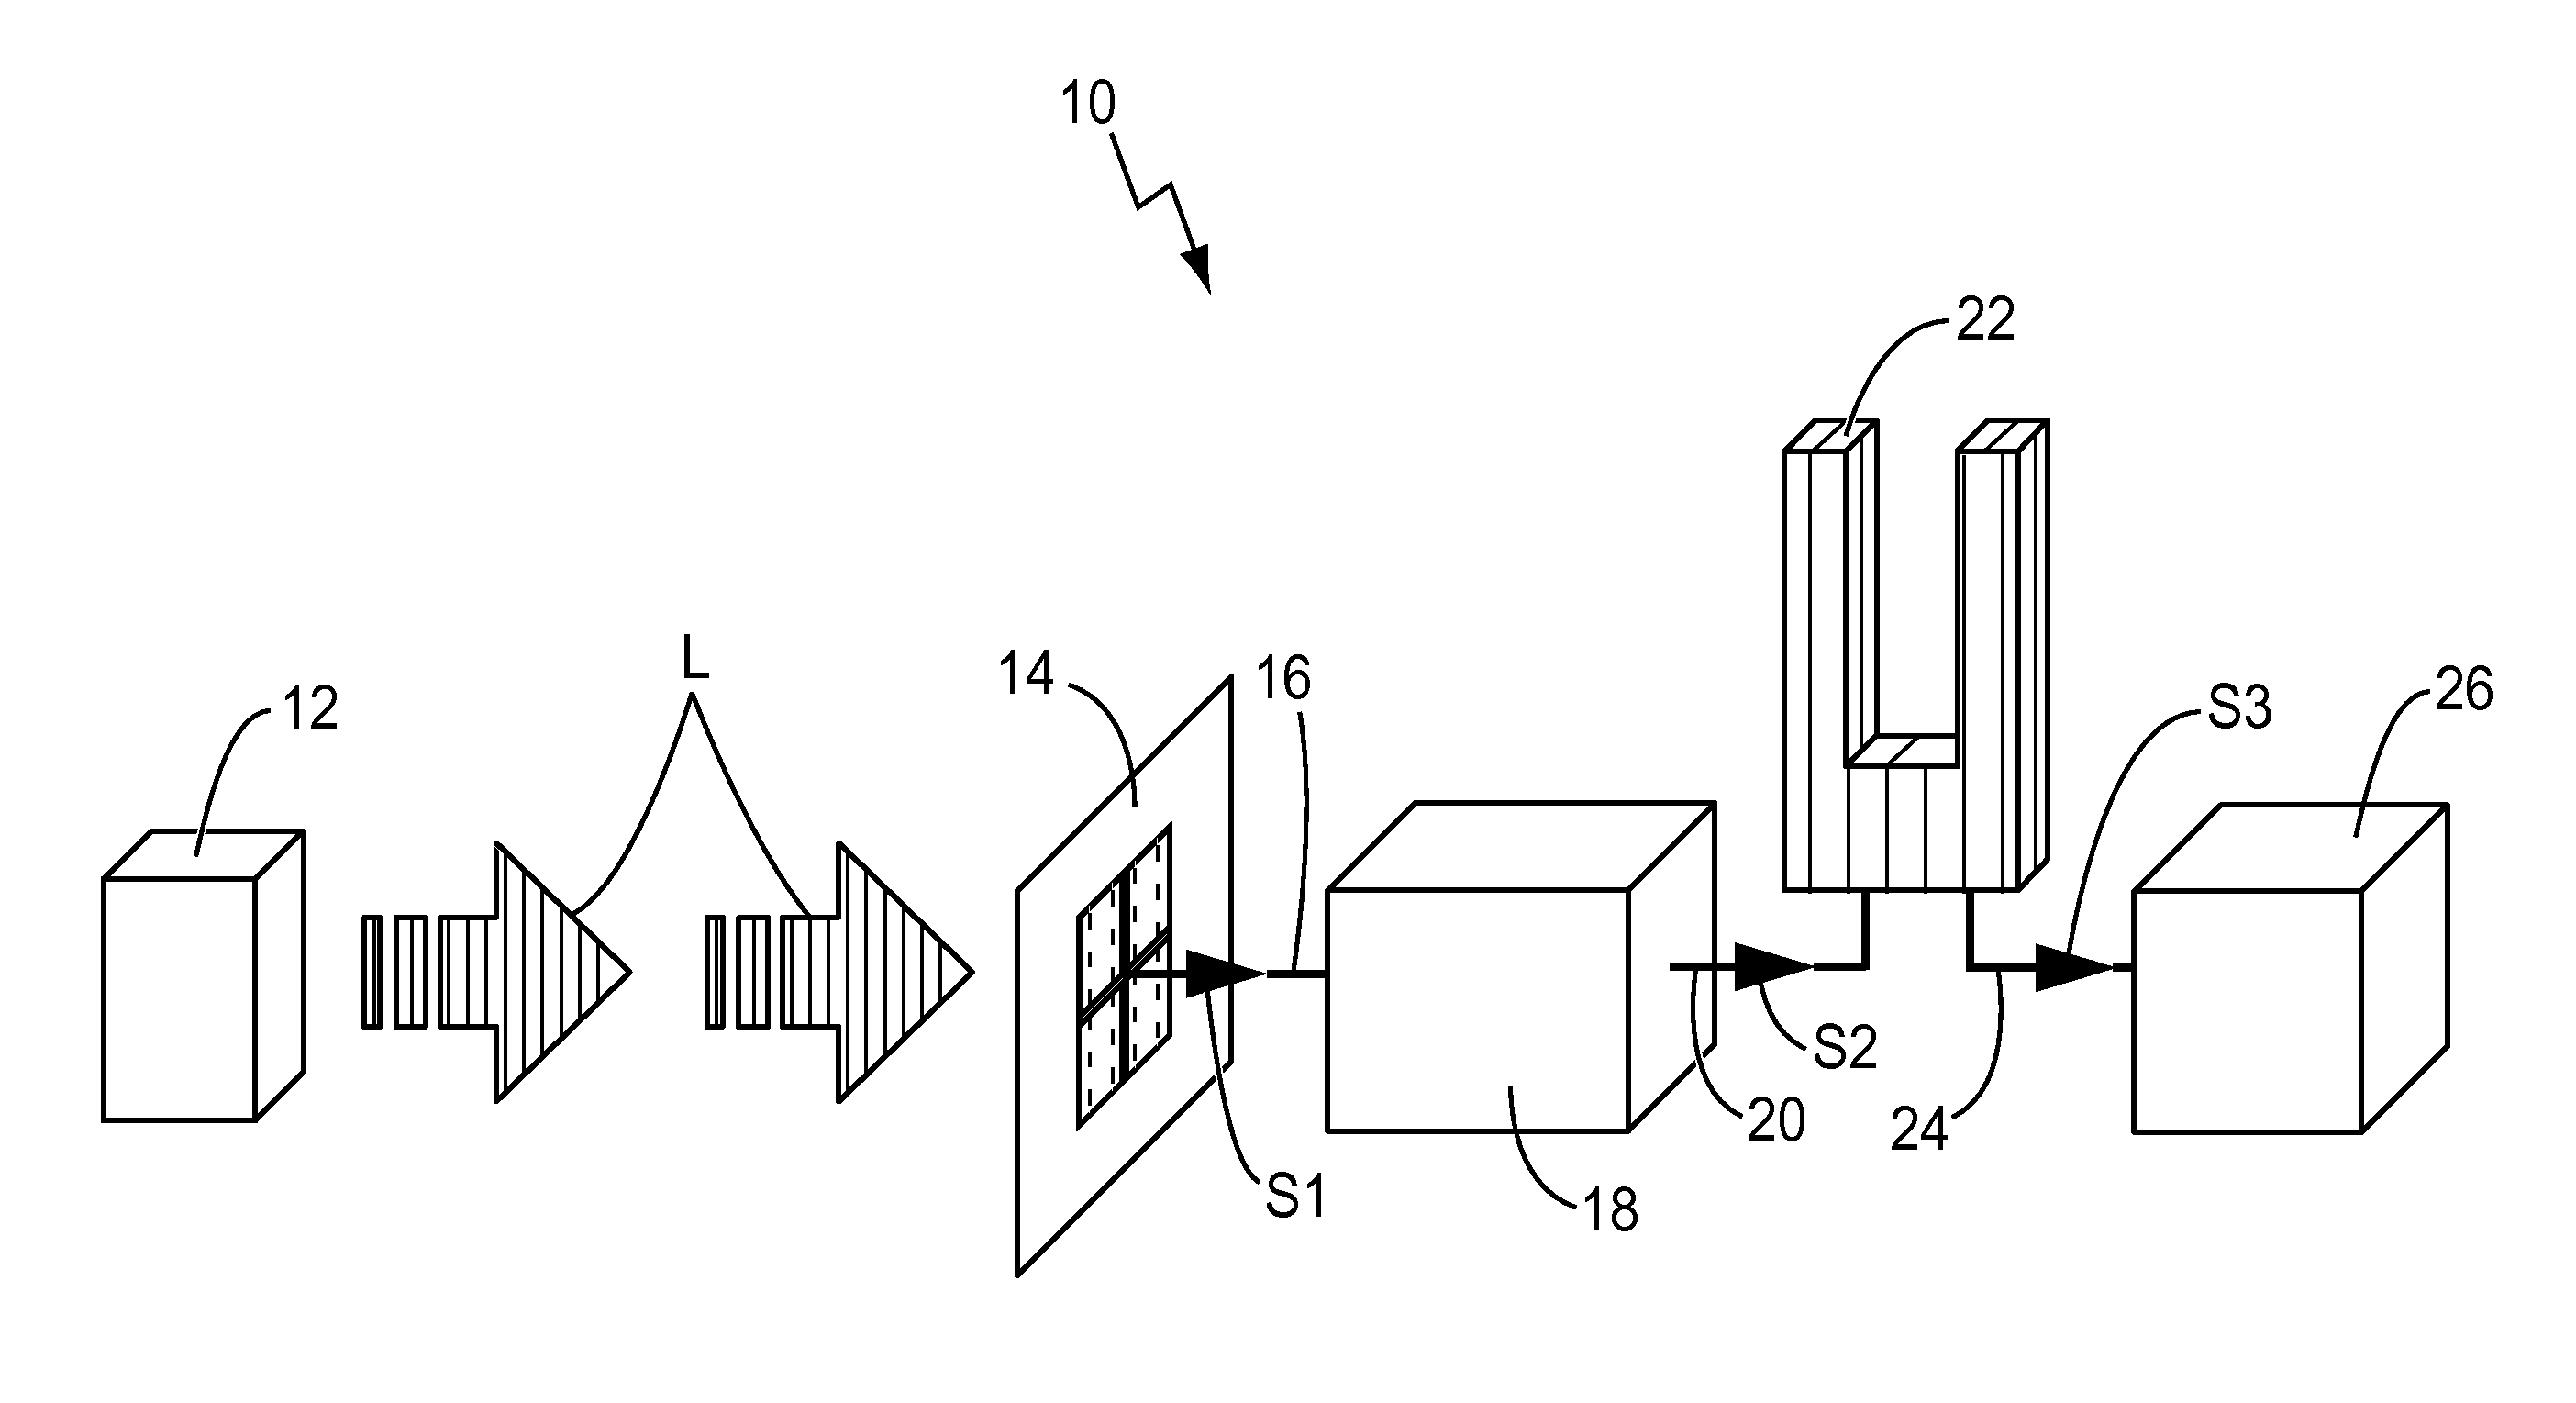 Acoustic enhancement for photo detecting devices